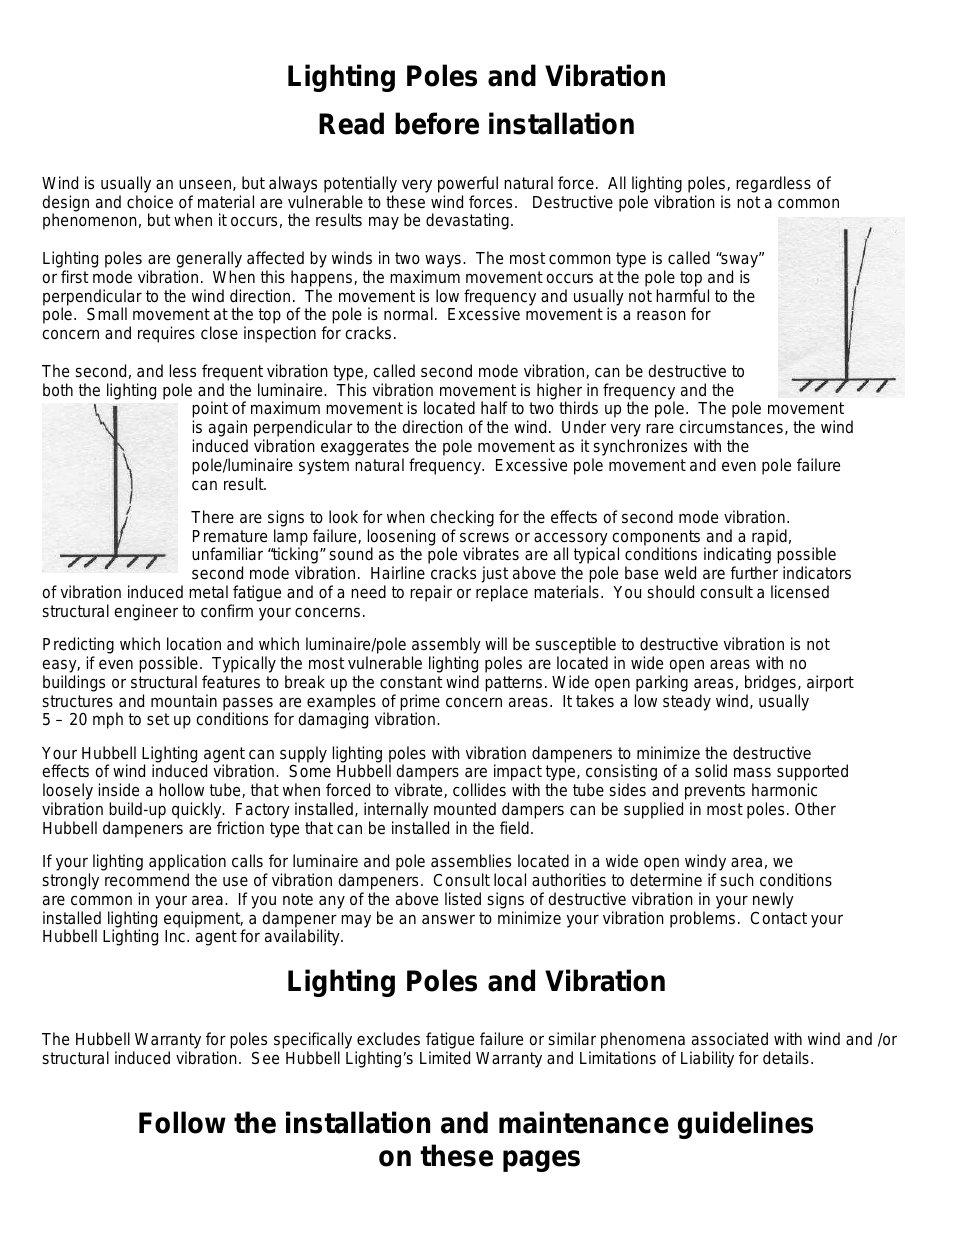 Lighting Poles and Vibration Read before installation